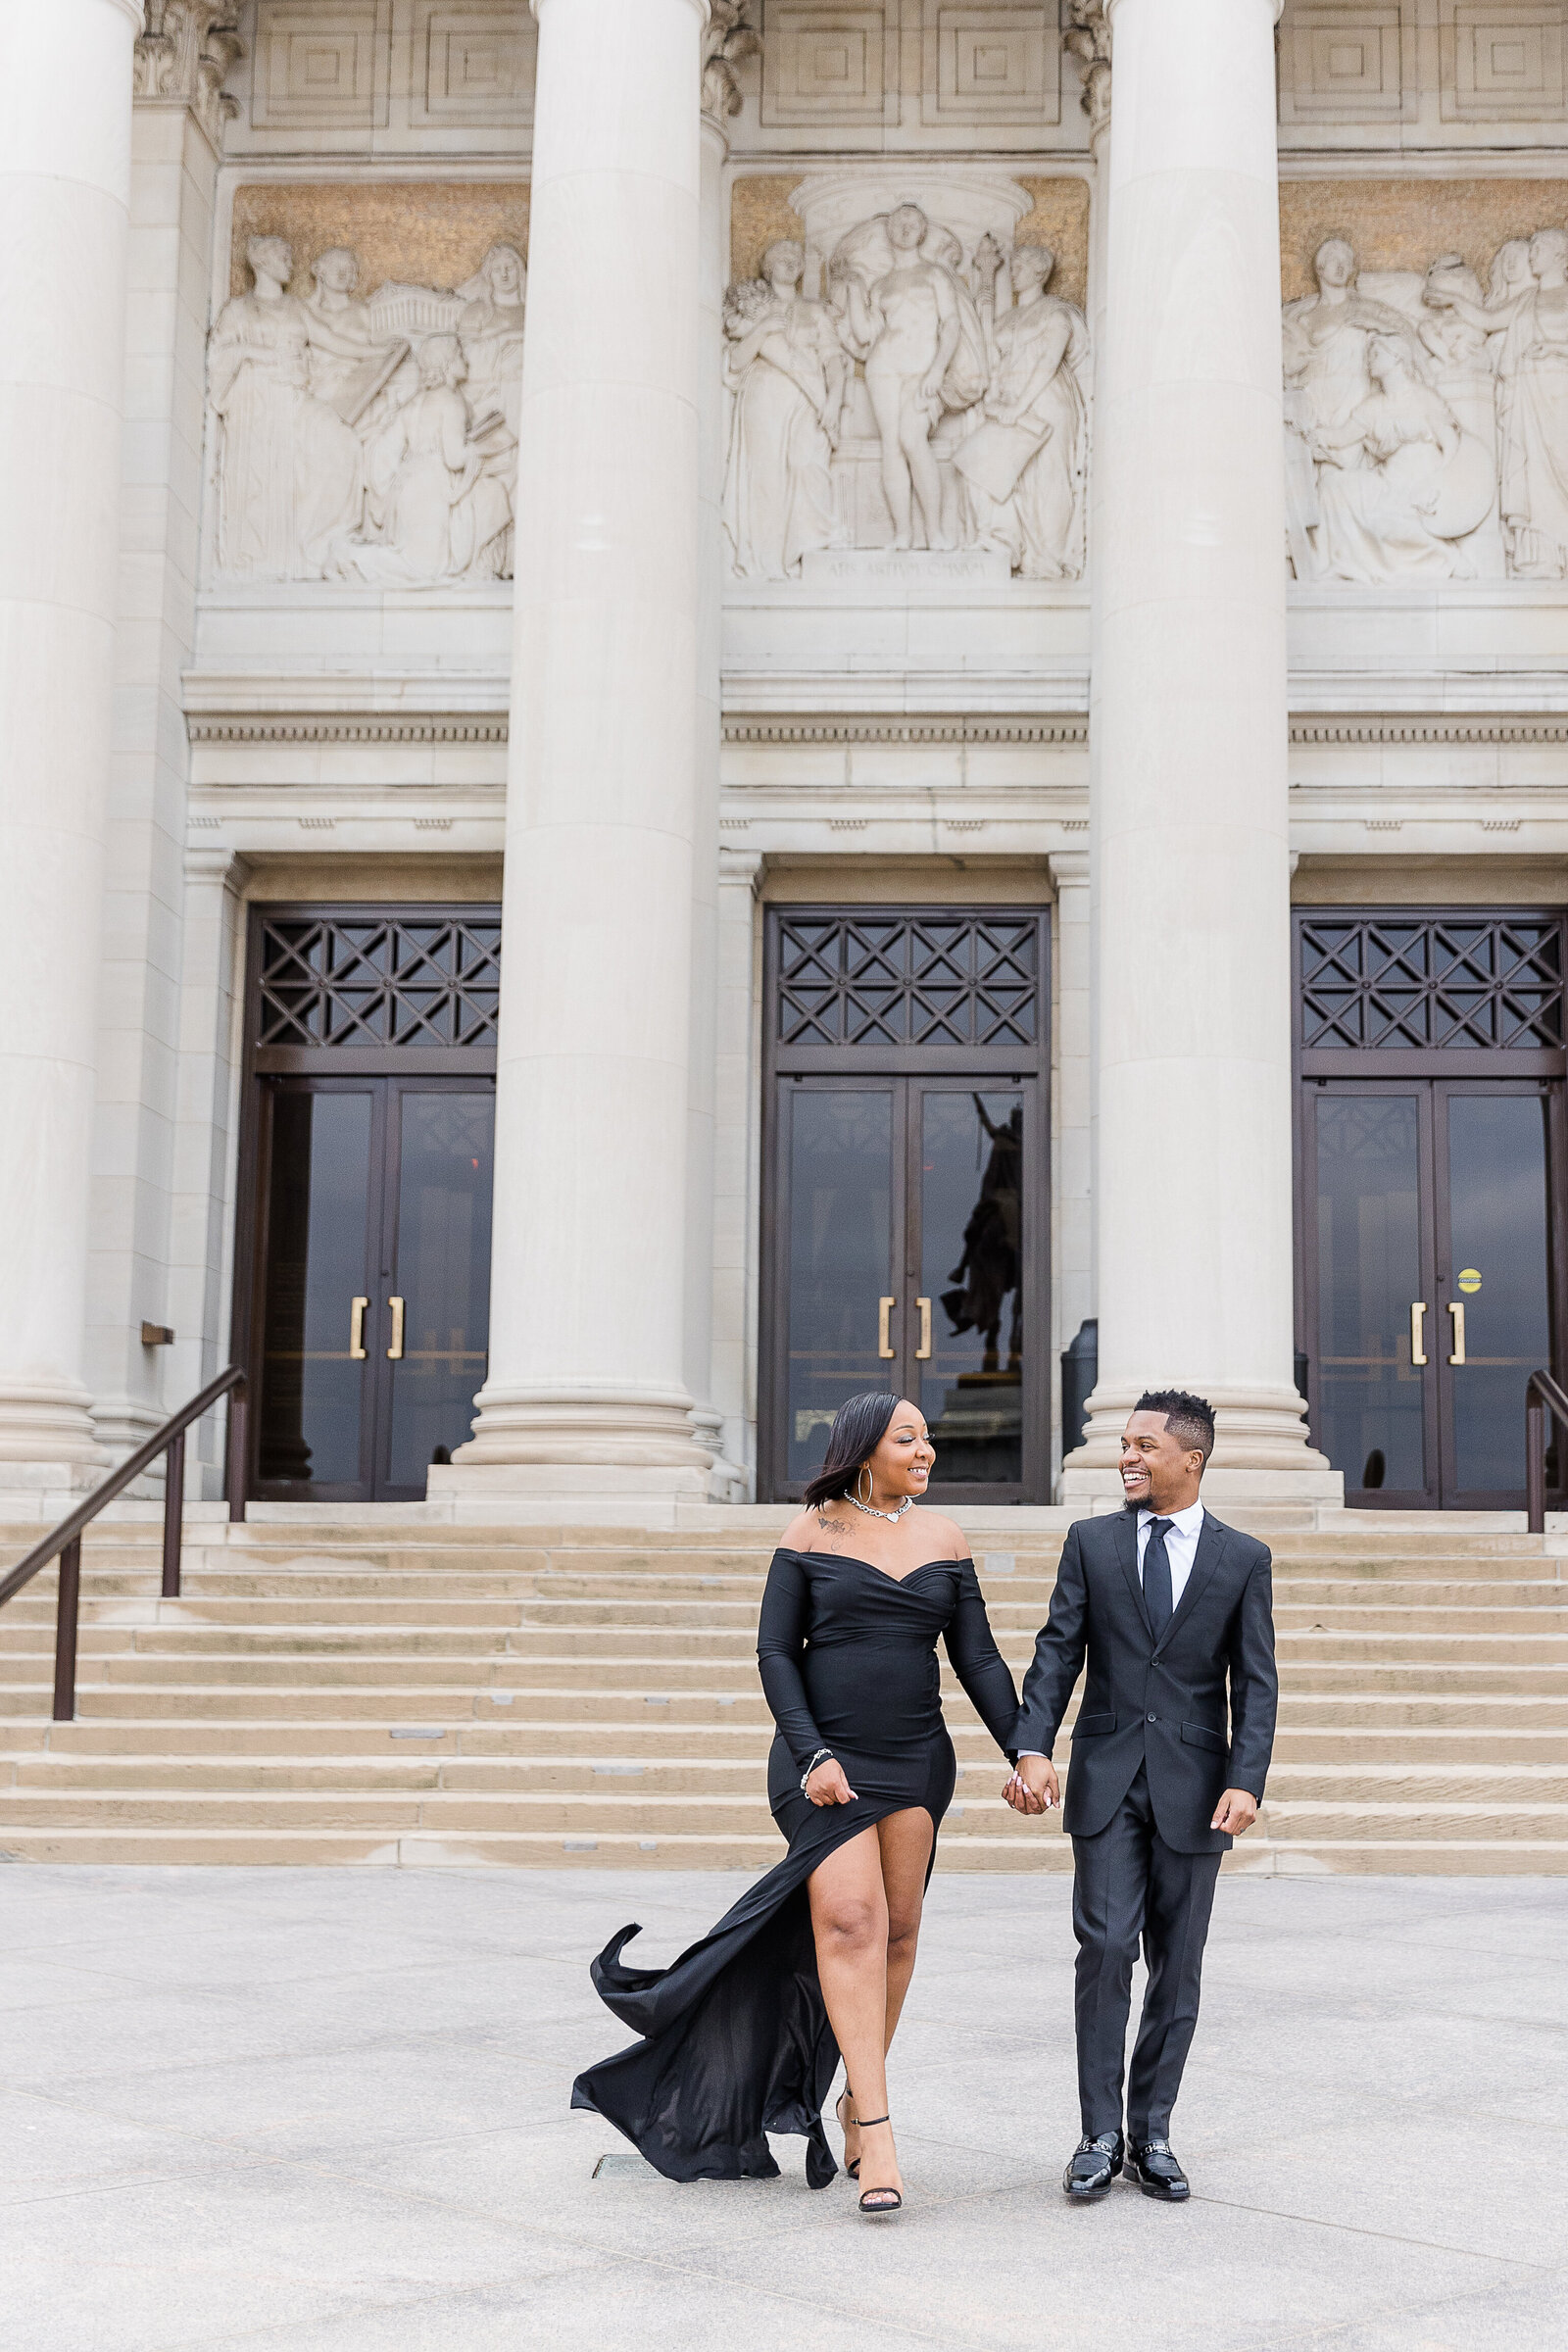 Engagement and wedding photographer in St. Louis Mo